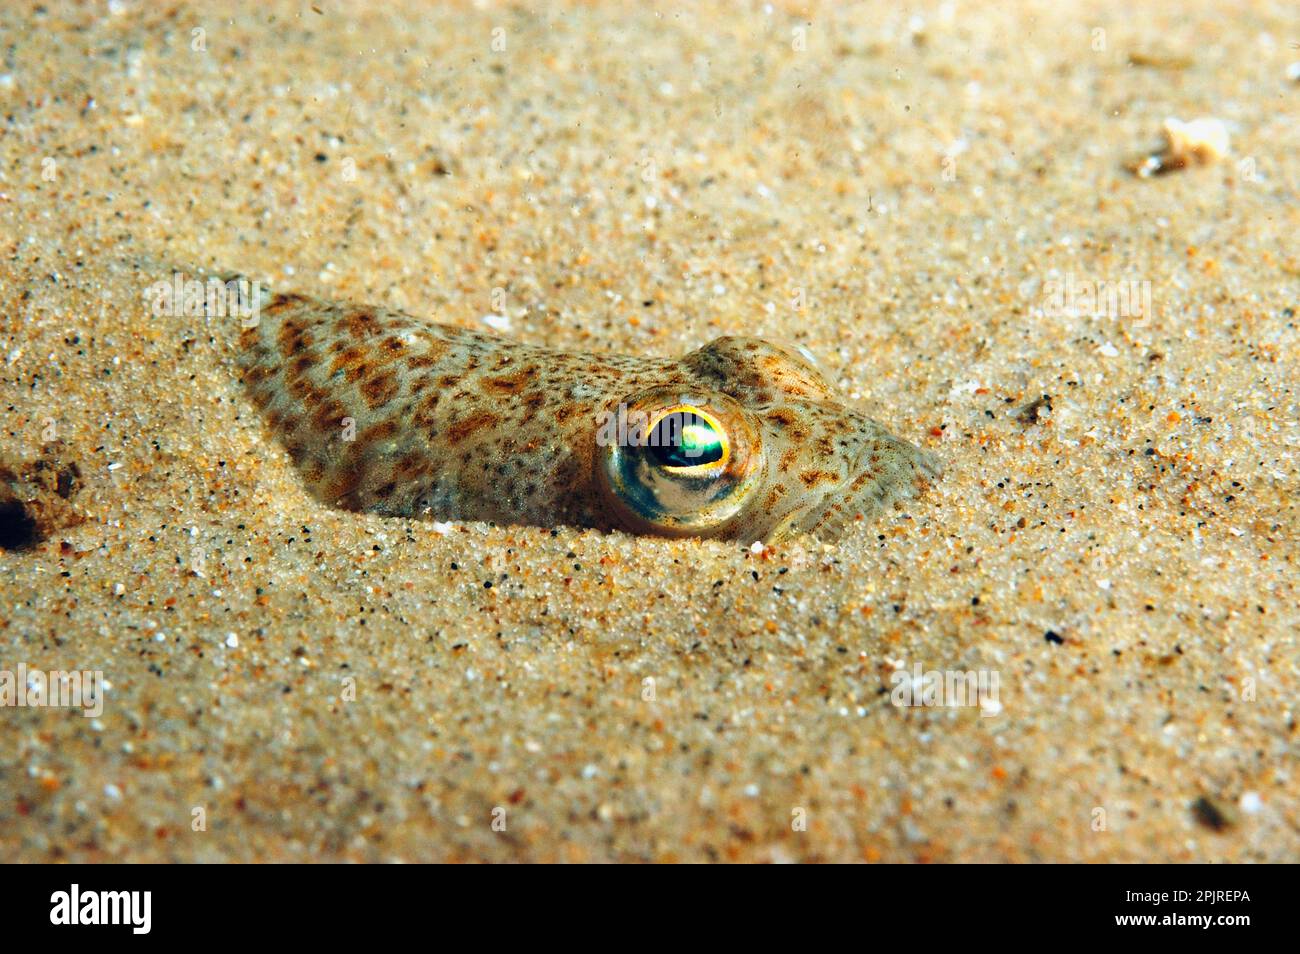 Lesser weever (Echiichthys vipera) Viperquoise, poisonous, Other animals, Fish, Perch-like, Animals, Lesser Weever adult, buried in sandy seabed Stock Photo